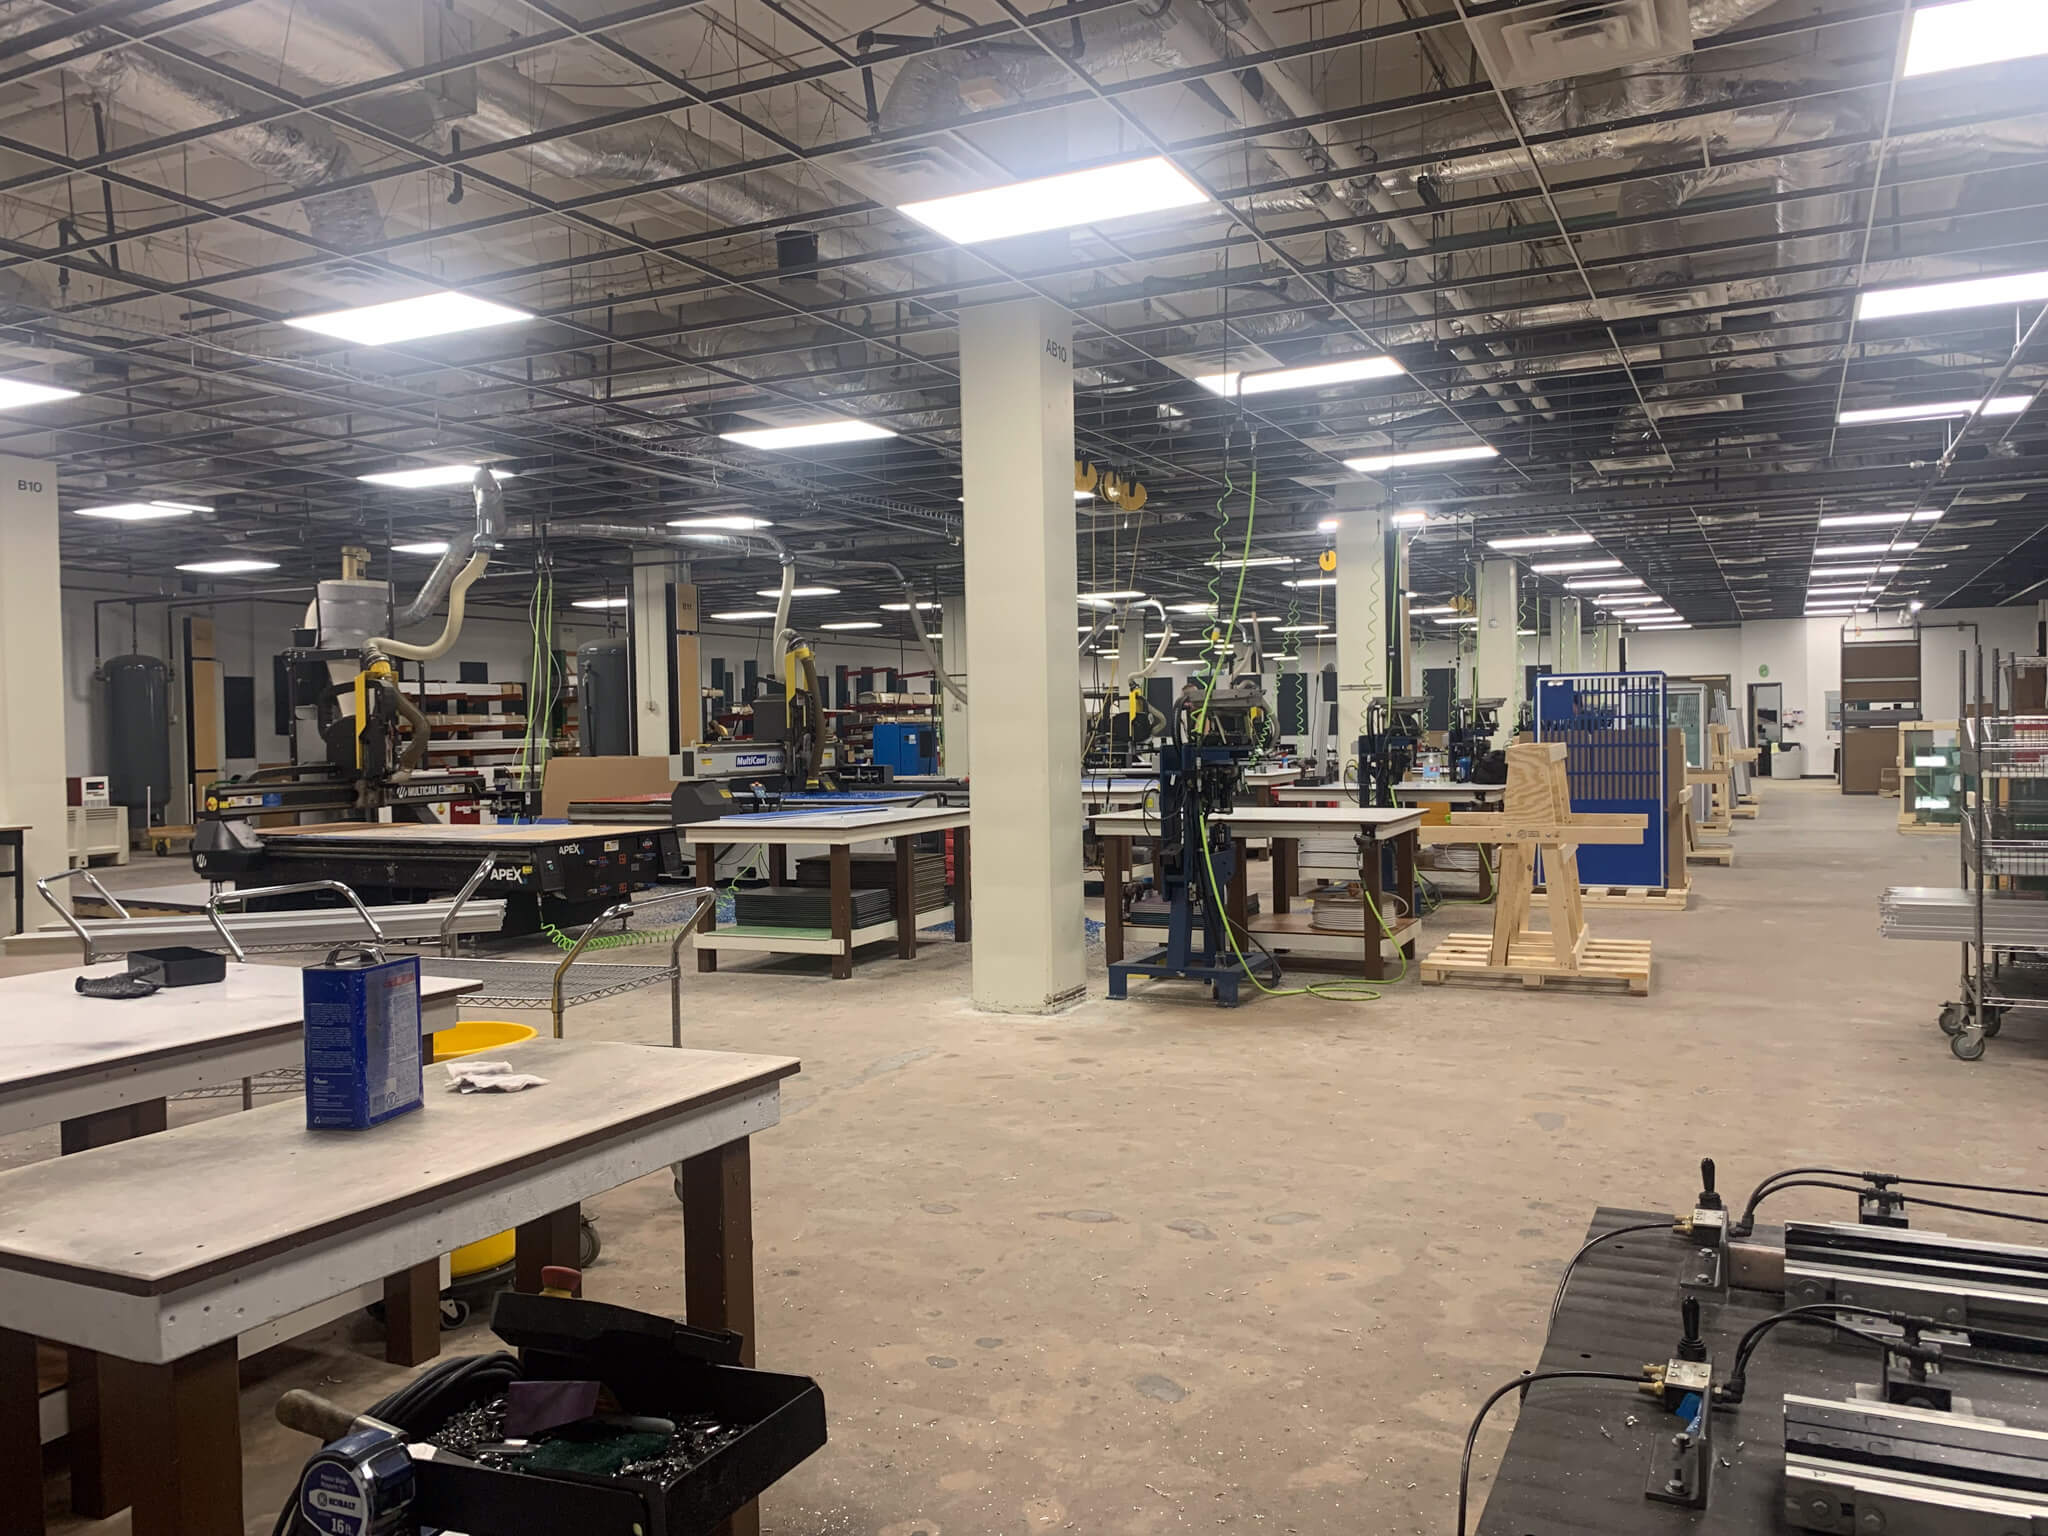 Manufacturing space of Gator Kennels. Multiple machines visible including CNC Routers, Dust Collectors, and assembly benches.